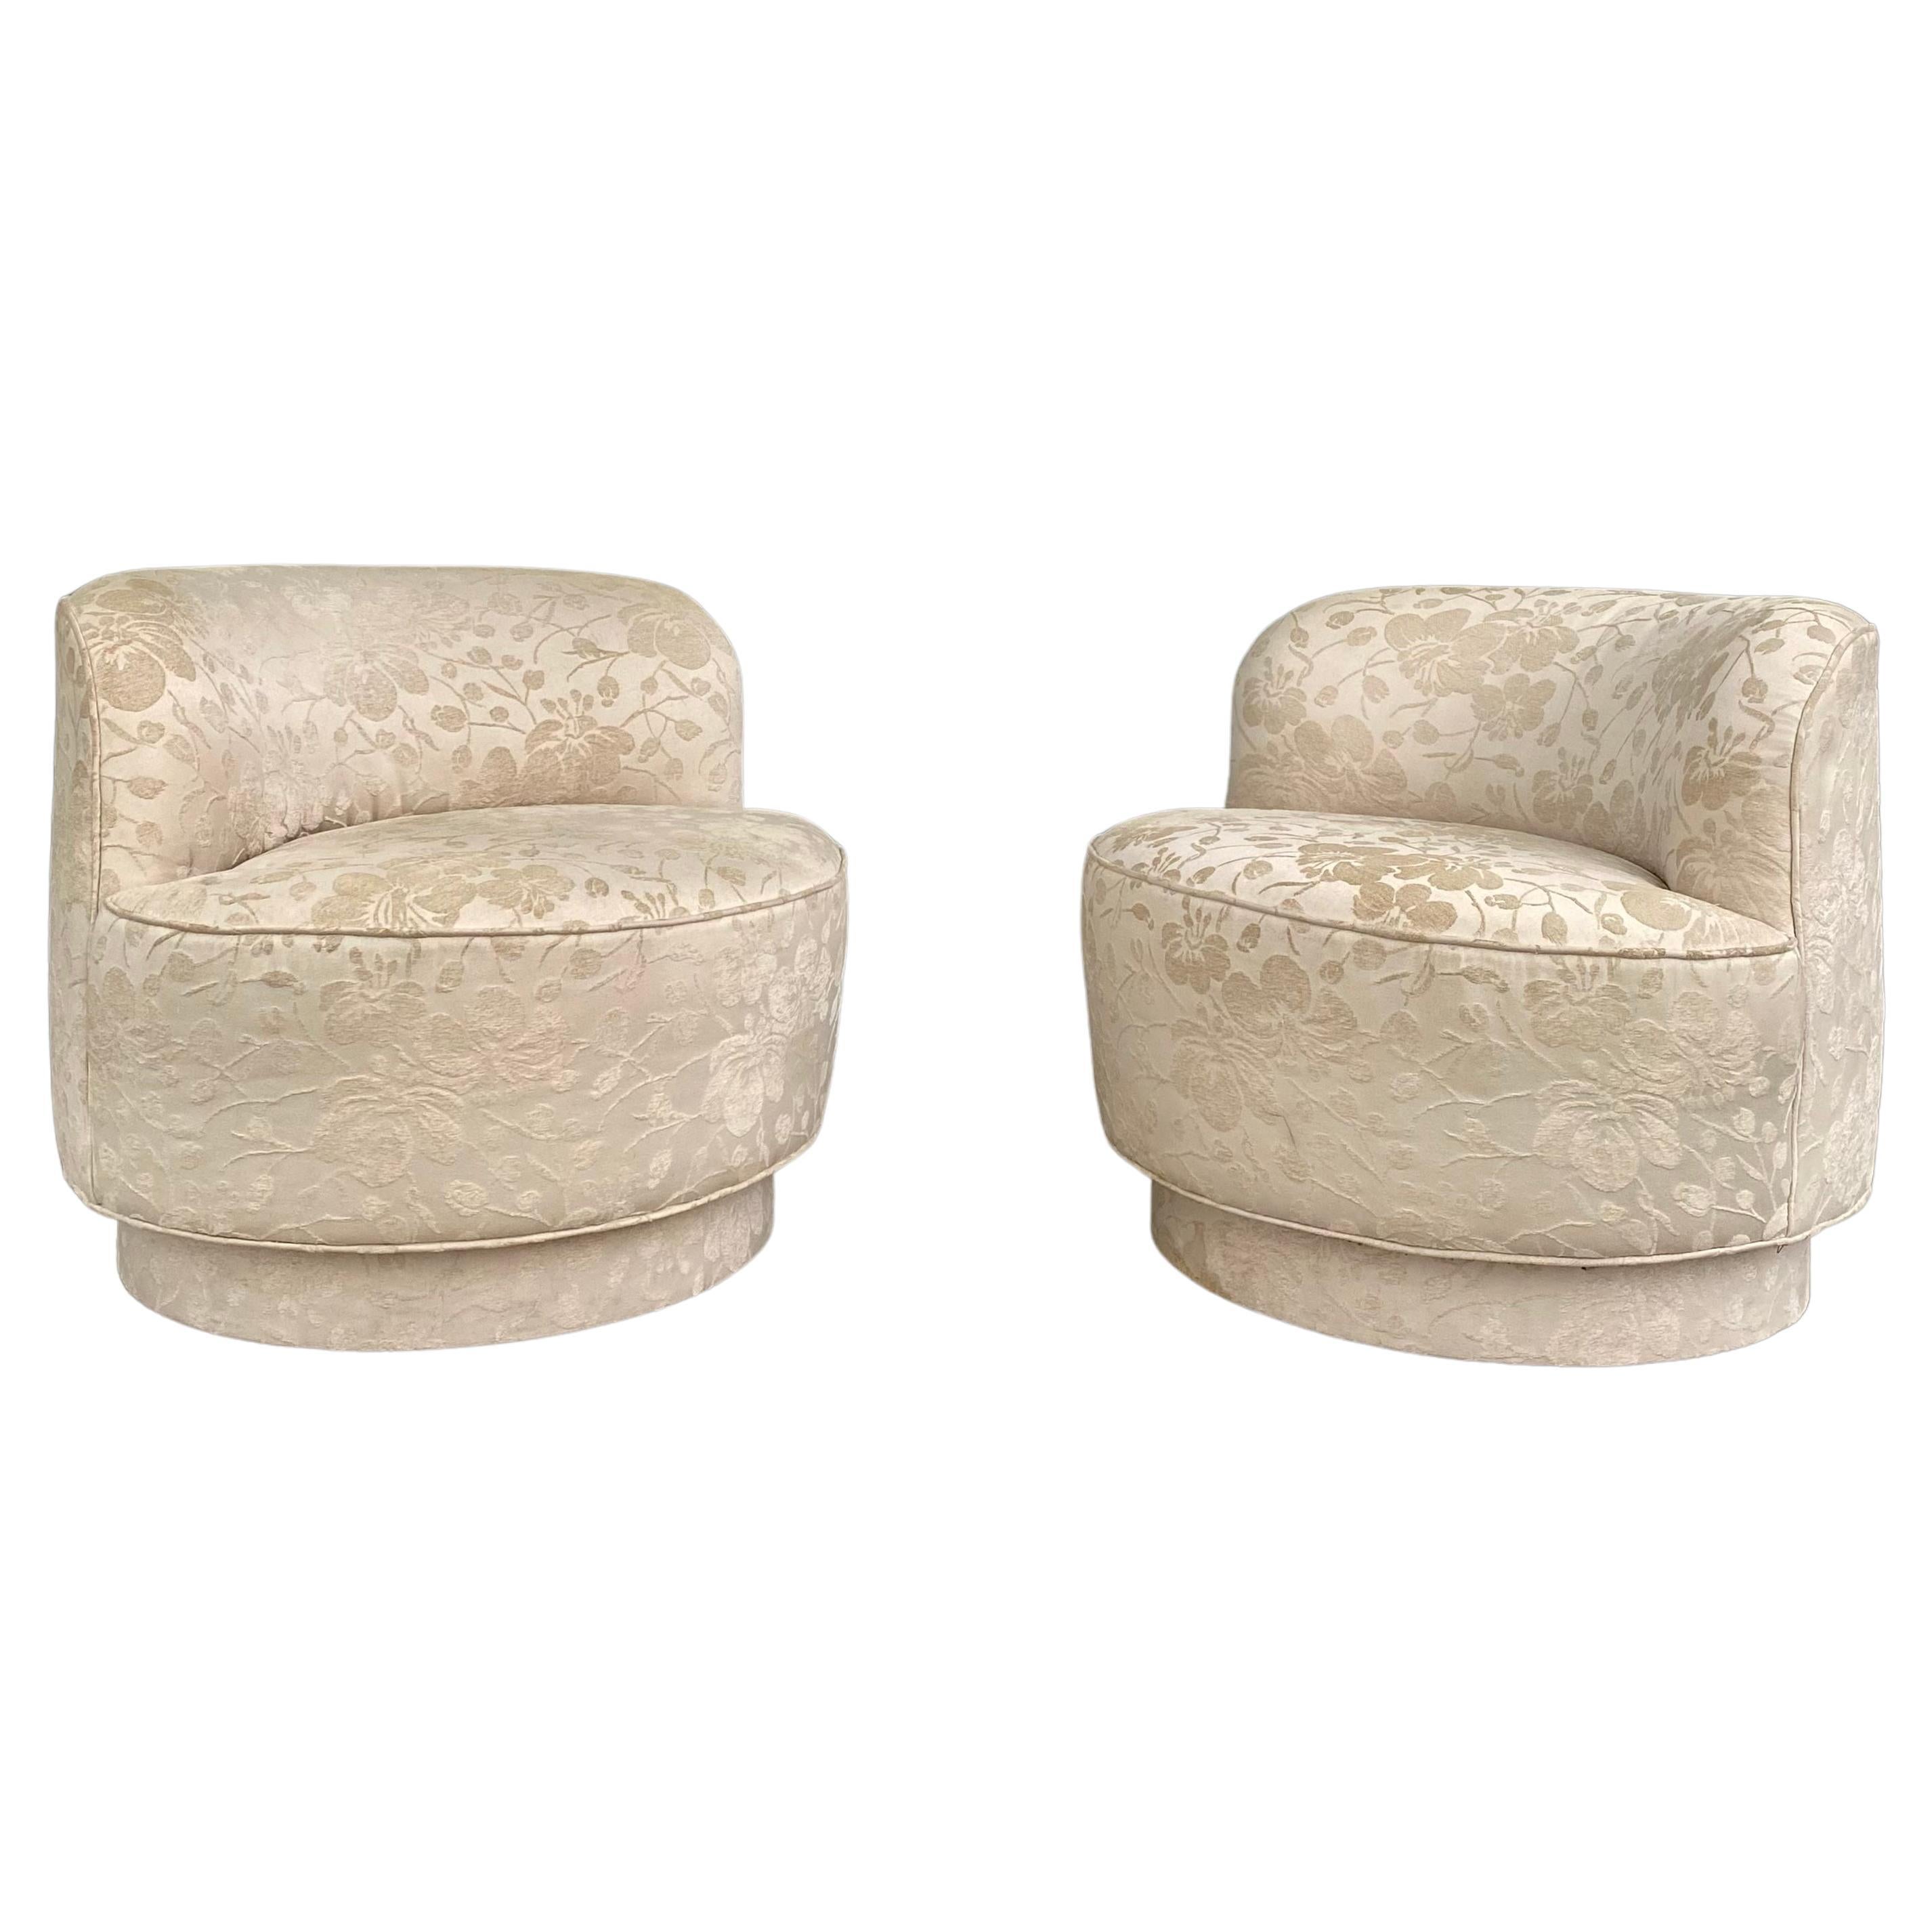 1980s Preview Embroidered Floral Sculptural Curved Swivel Chairs, Set of 2 For Sale